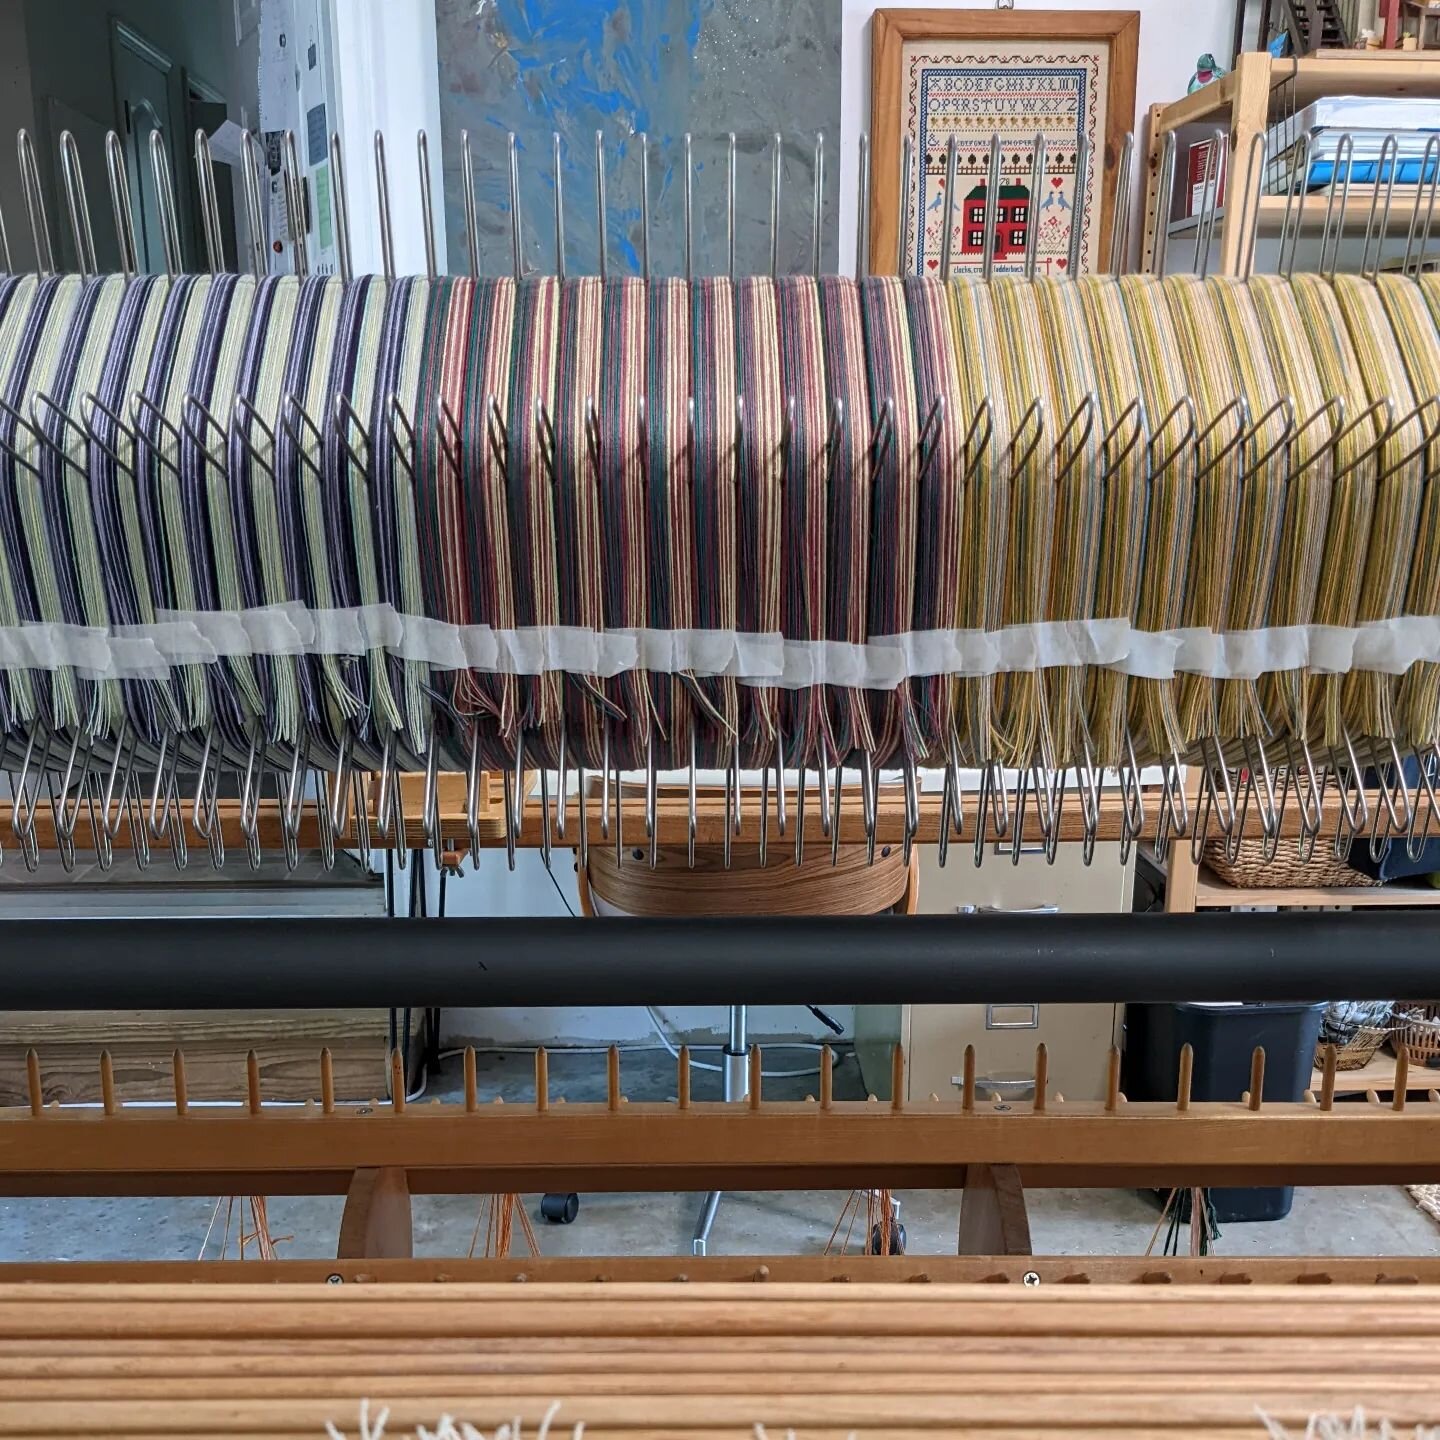 All the colors, all the time 💖
#weaving #handwoven #productionweaving